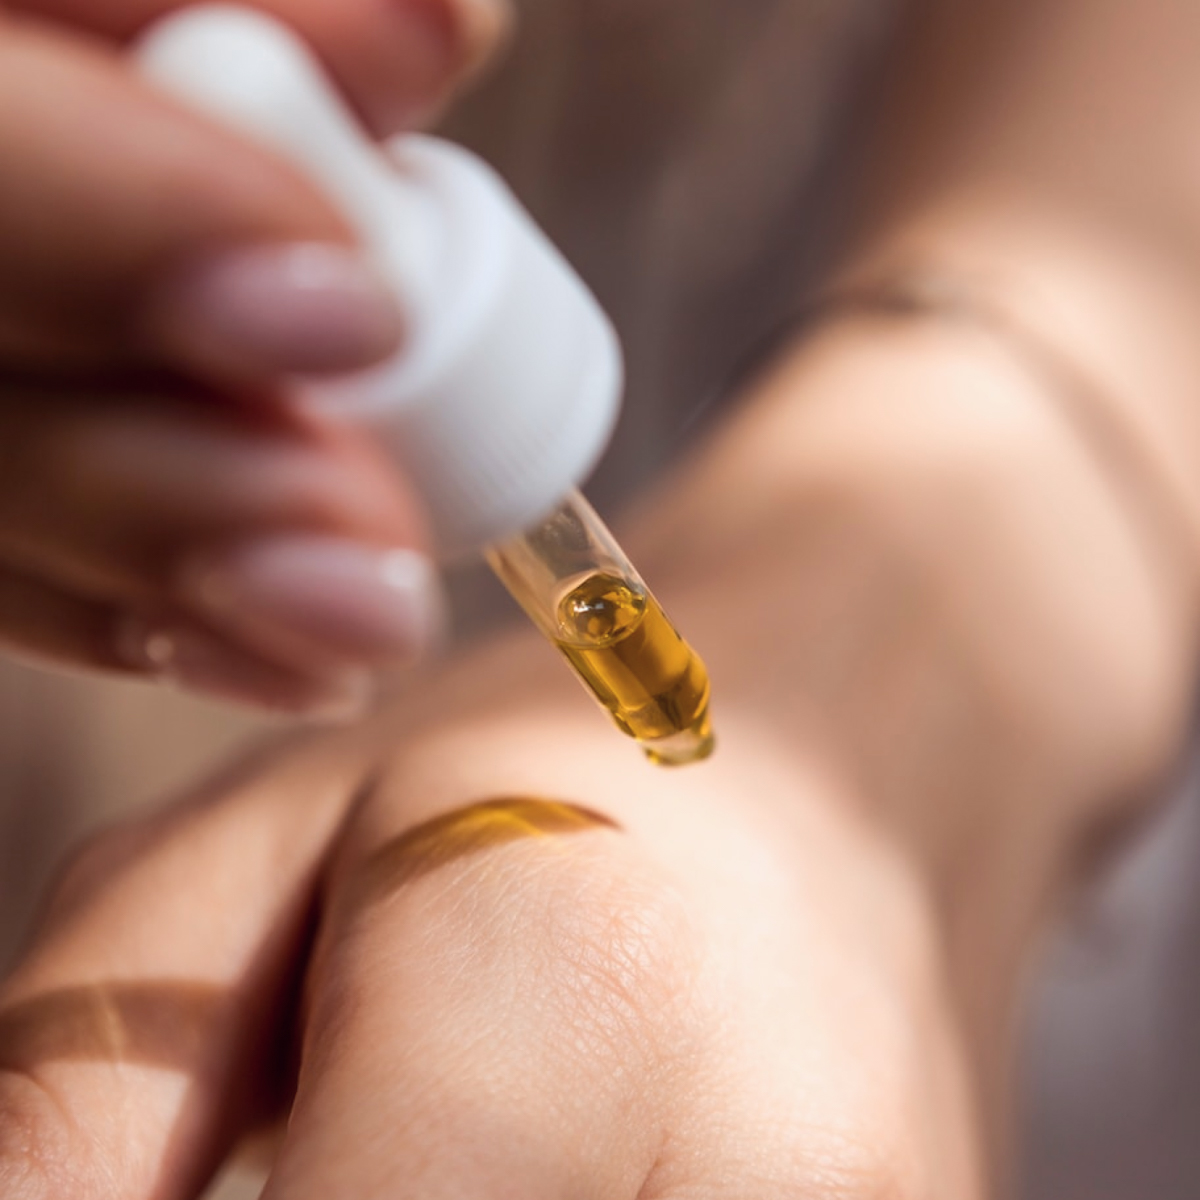 Close up of a pipette of golden liquid over someone's hand.